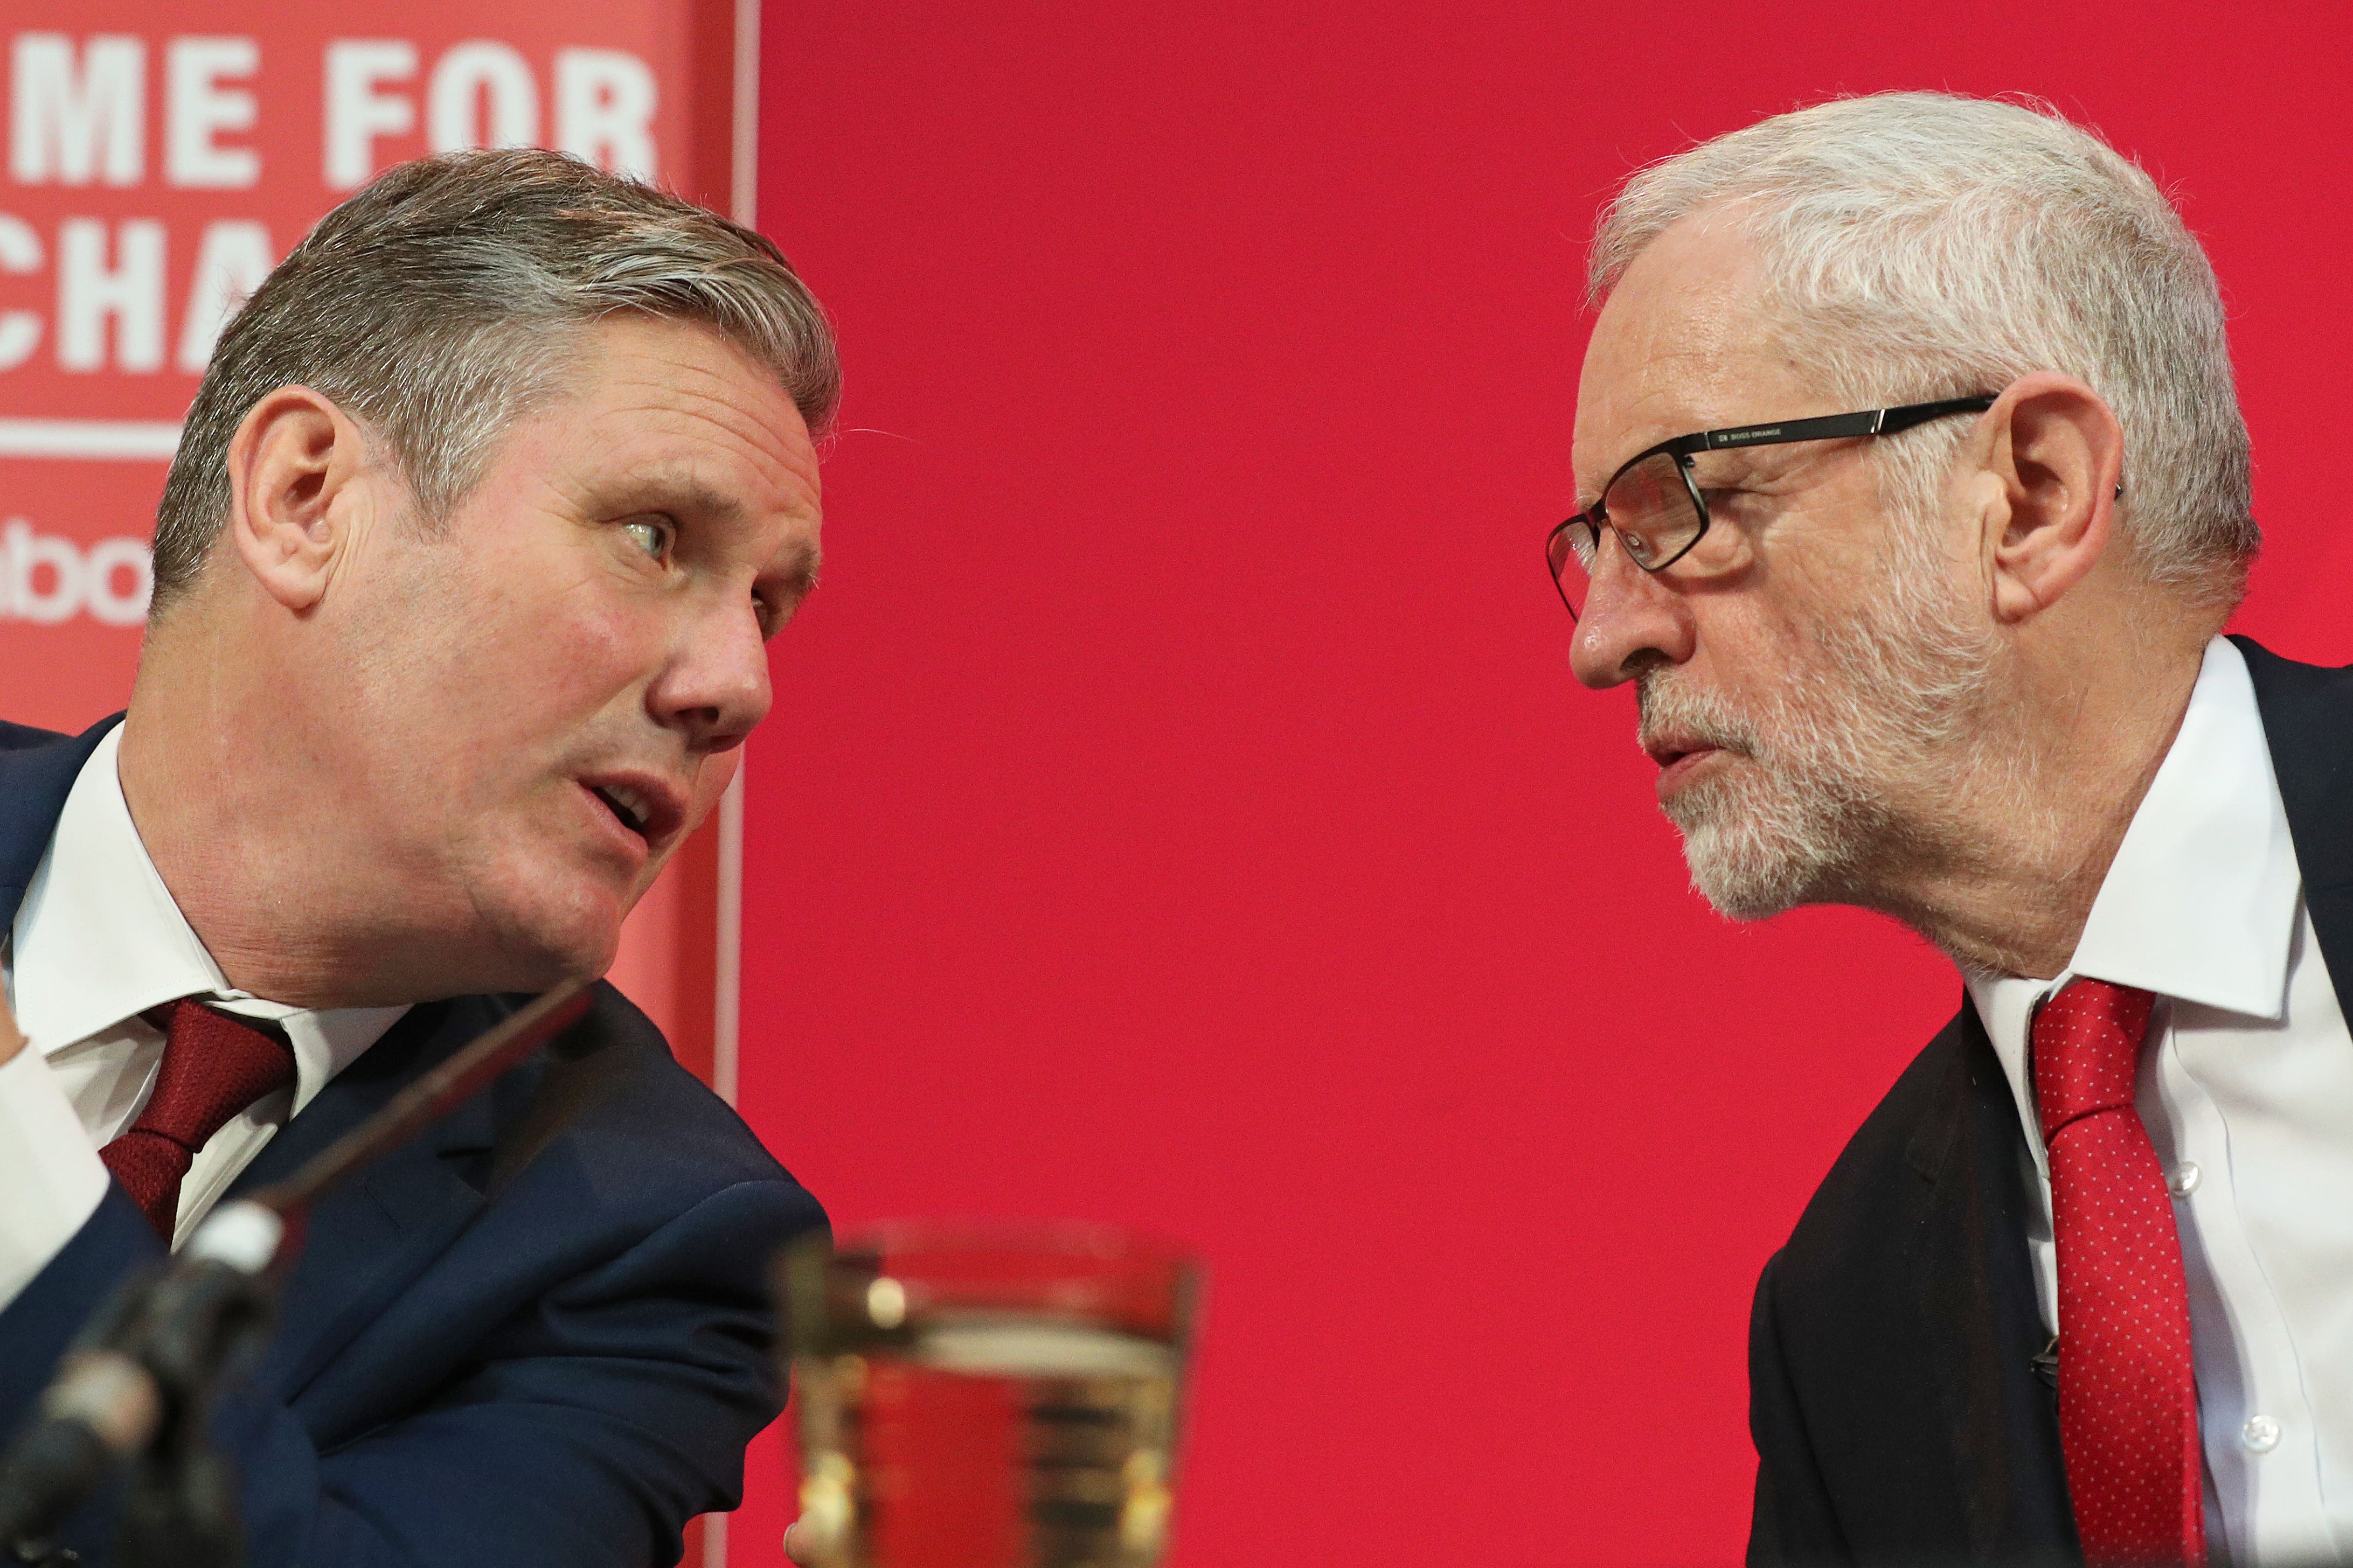 Then Labour Party leader Jeremy Corbyn (right) alongside shadow Brexit secretary Keir Starmer during a press conference in central London in 2019 Jonathan Brady/PA)